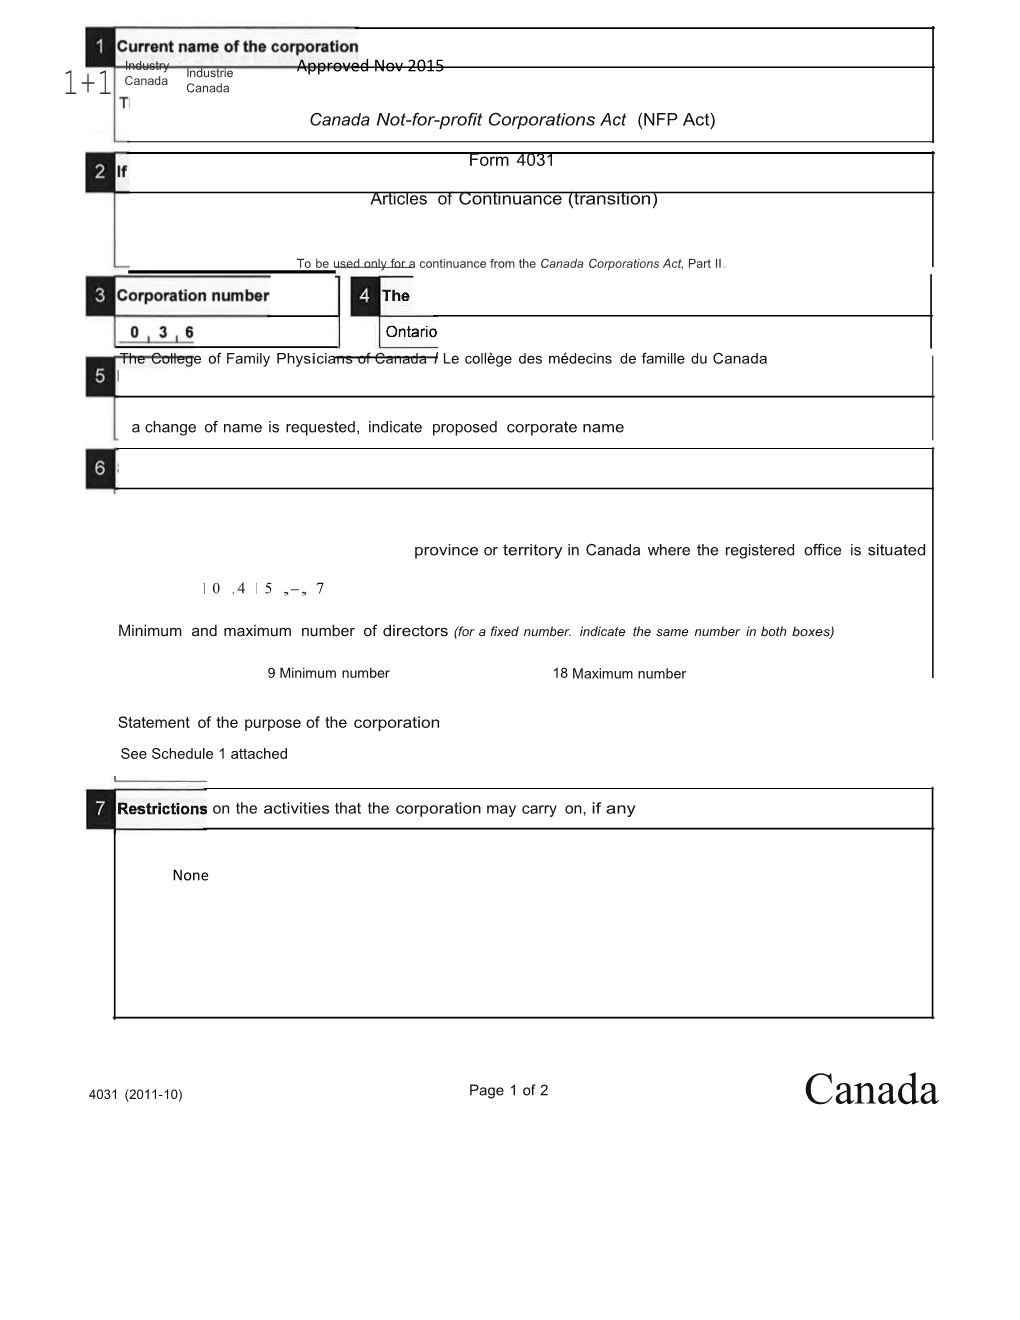 Canada Not-For-Profit Corporations Act (NFP Act) Form 4031